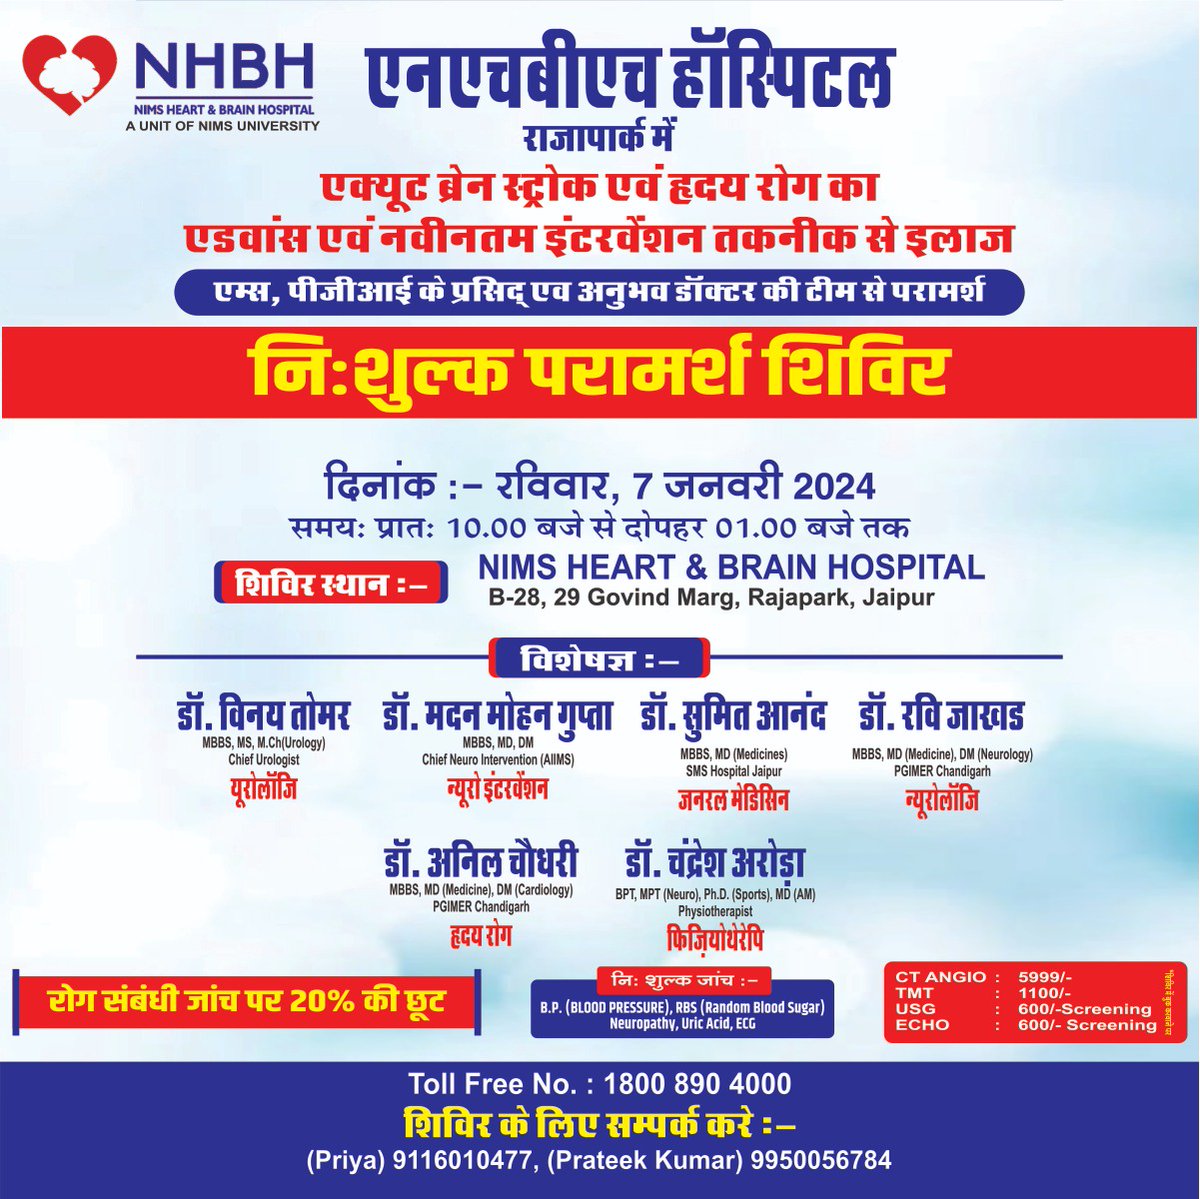 Join us for a FREE Counseling #Camp at #NHBHHospital, Rajapark!
we're announce our upcoming Free Counseling Camp! Whether you're navigating stress, anxiety, or simply need someone to talk to, our experienced Doctors are here to support you.